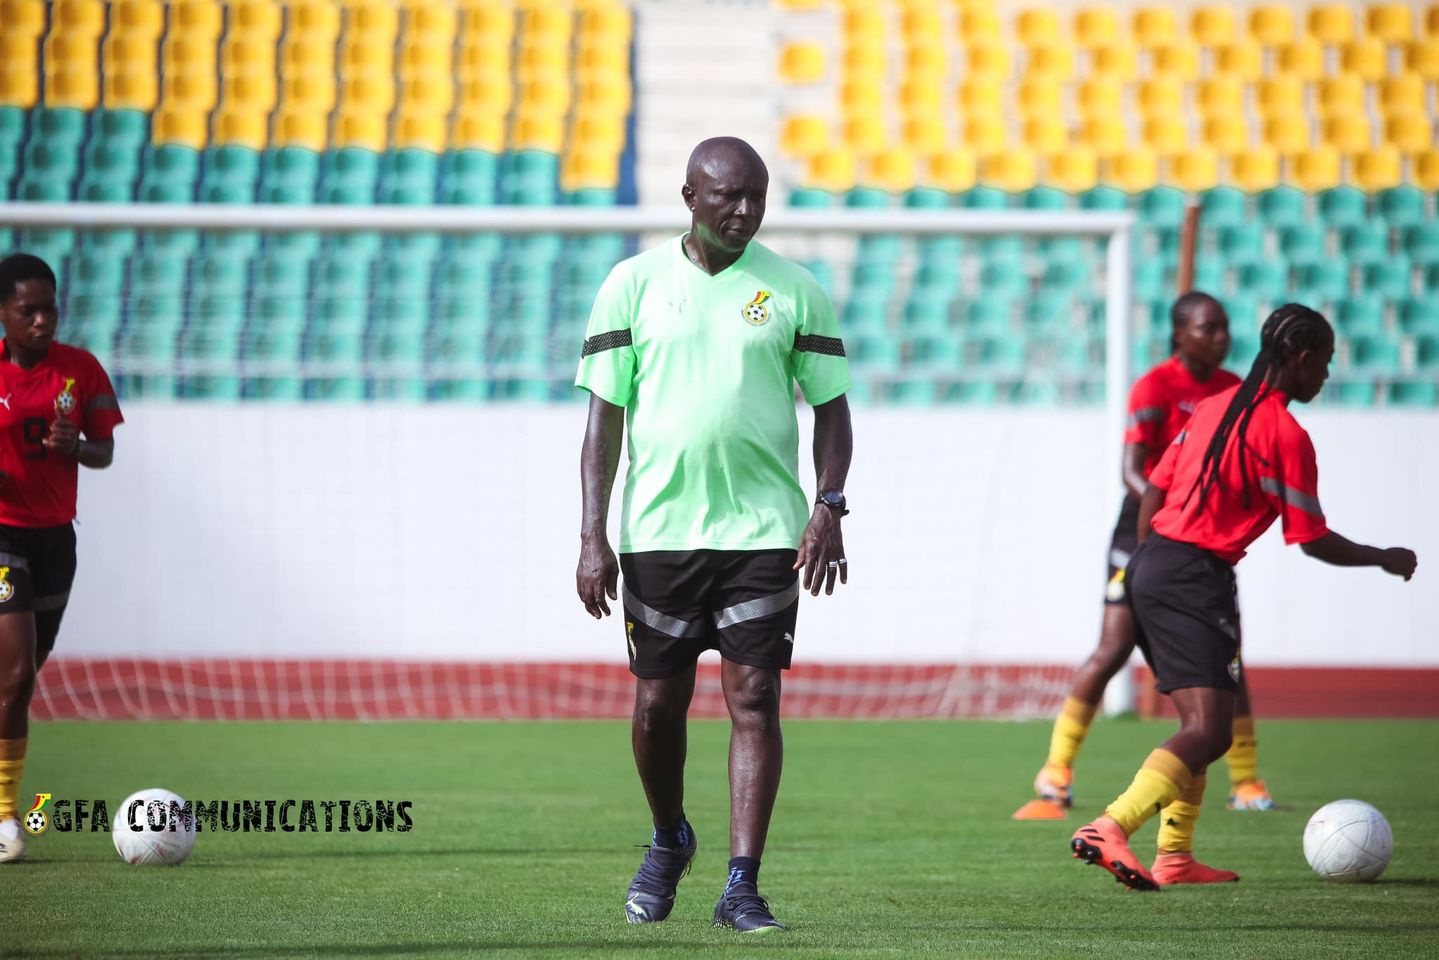 We are determined to qualify for World Cup - Black Princesses coach Yussif Basigi